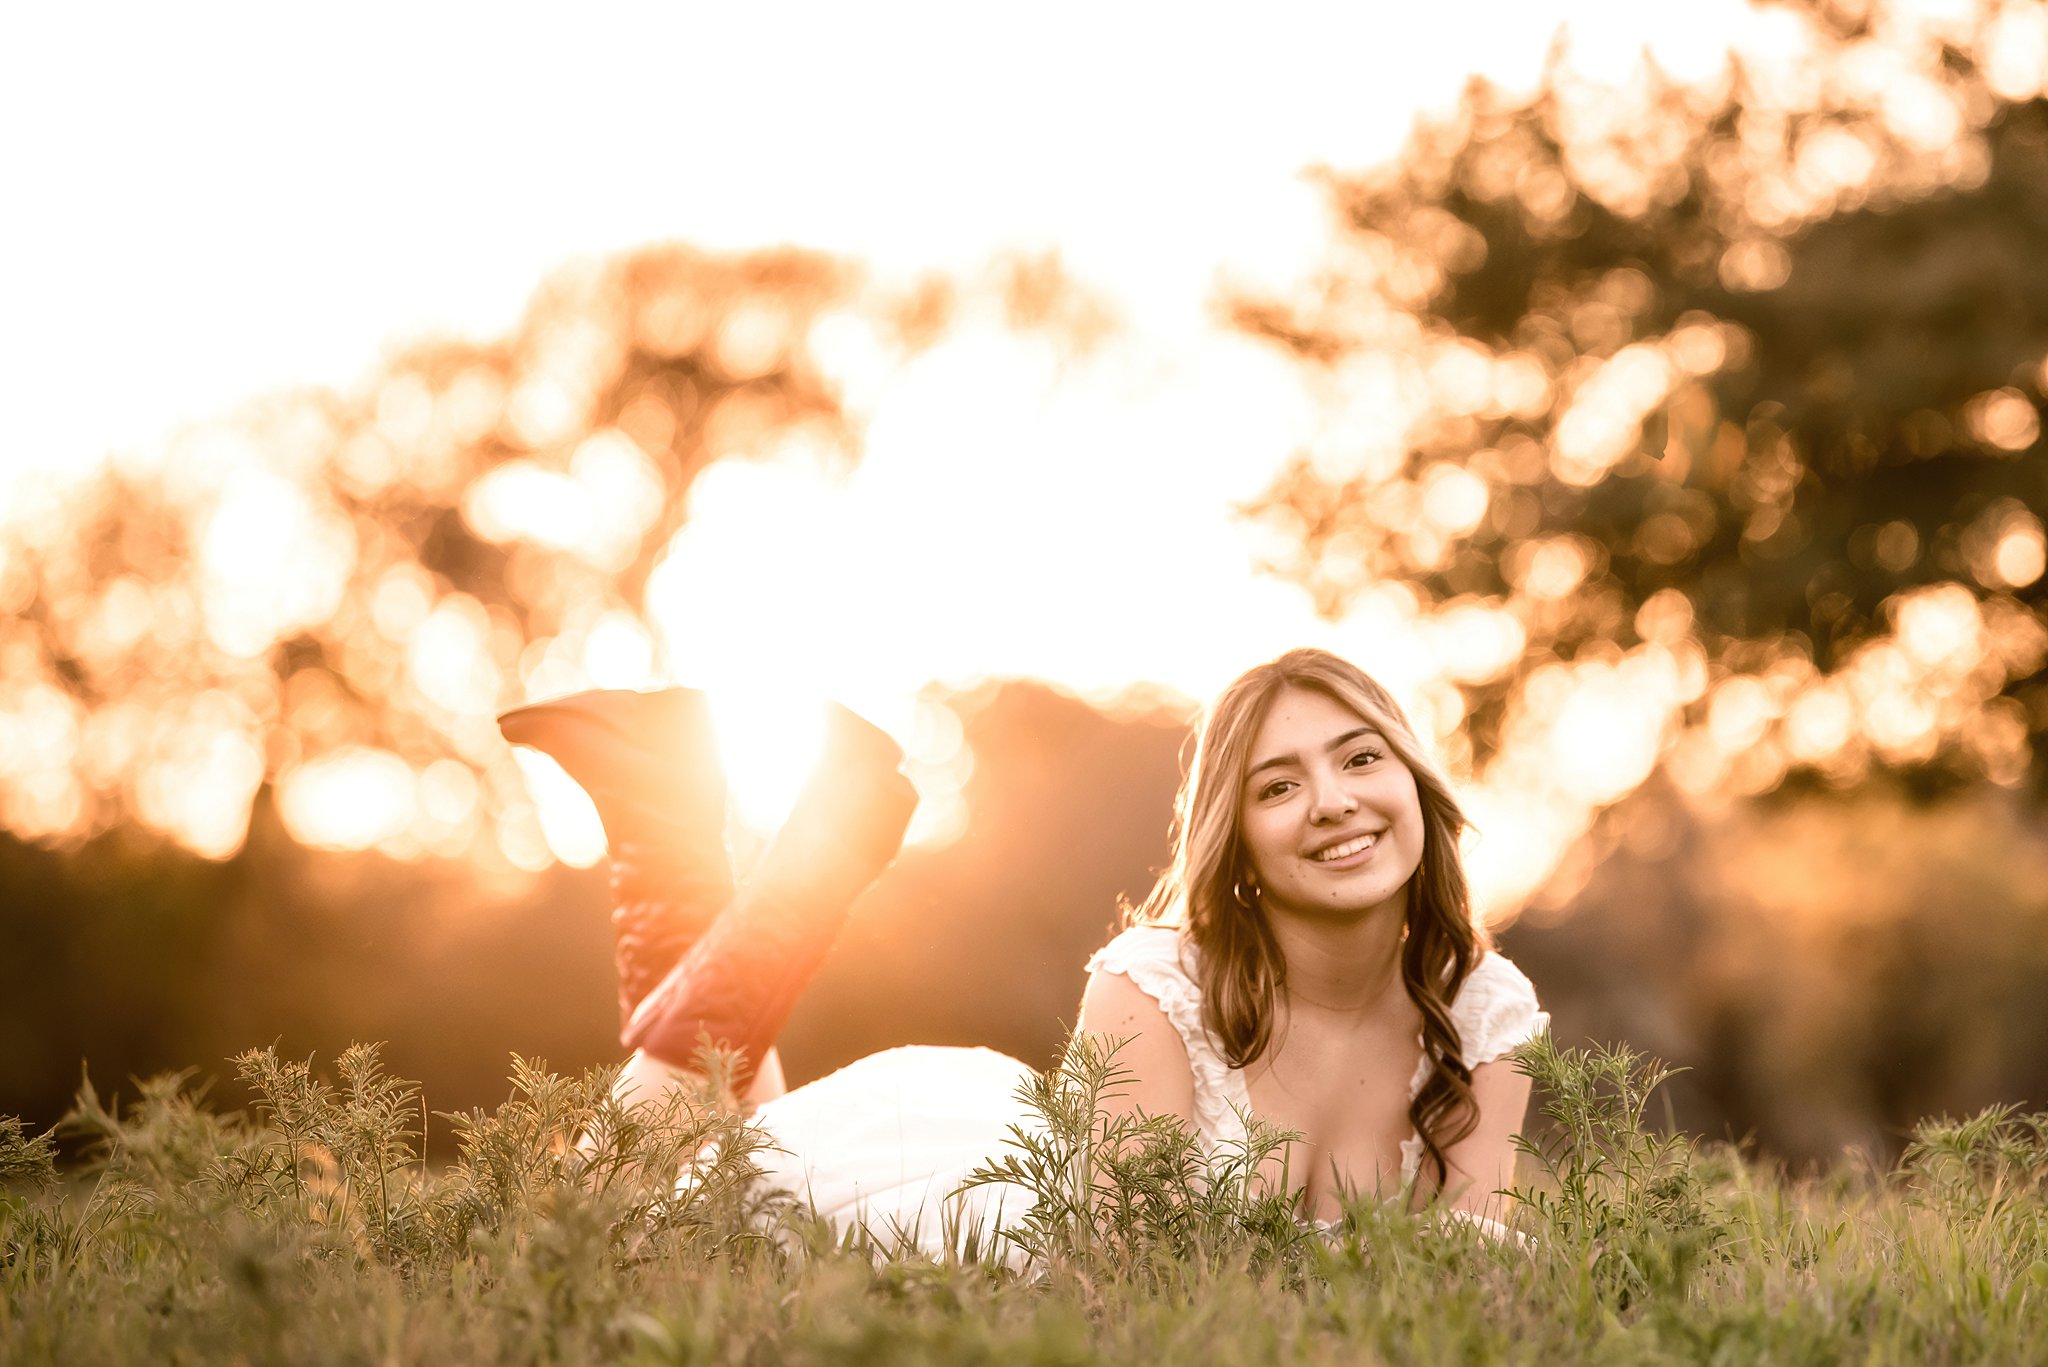 A high school senior lays in a field at sunset in red boots and a white dress